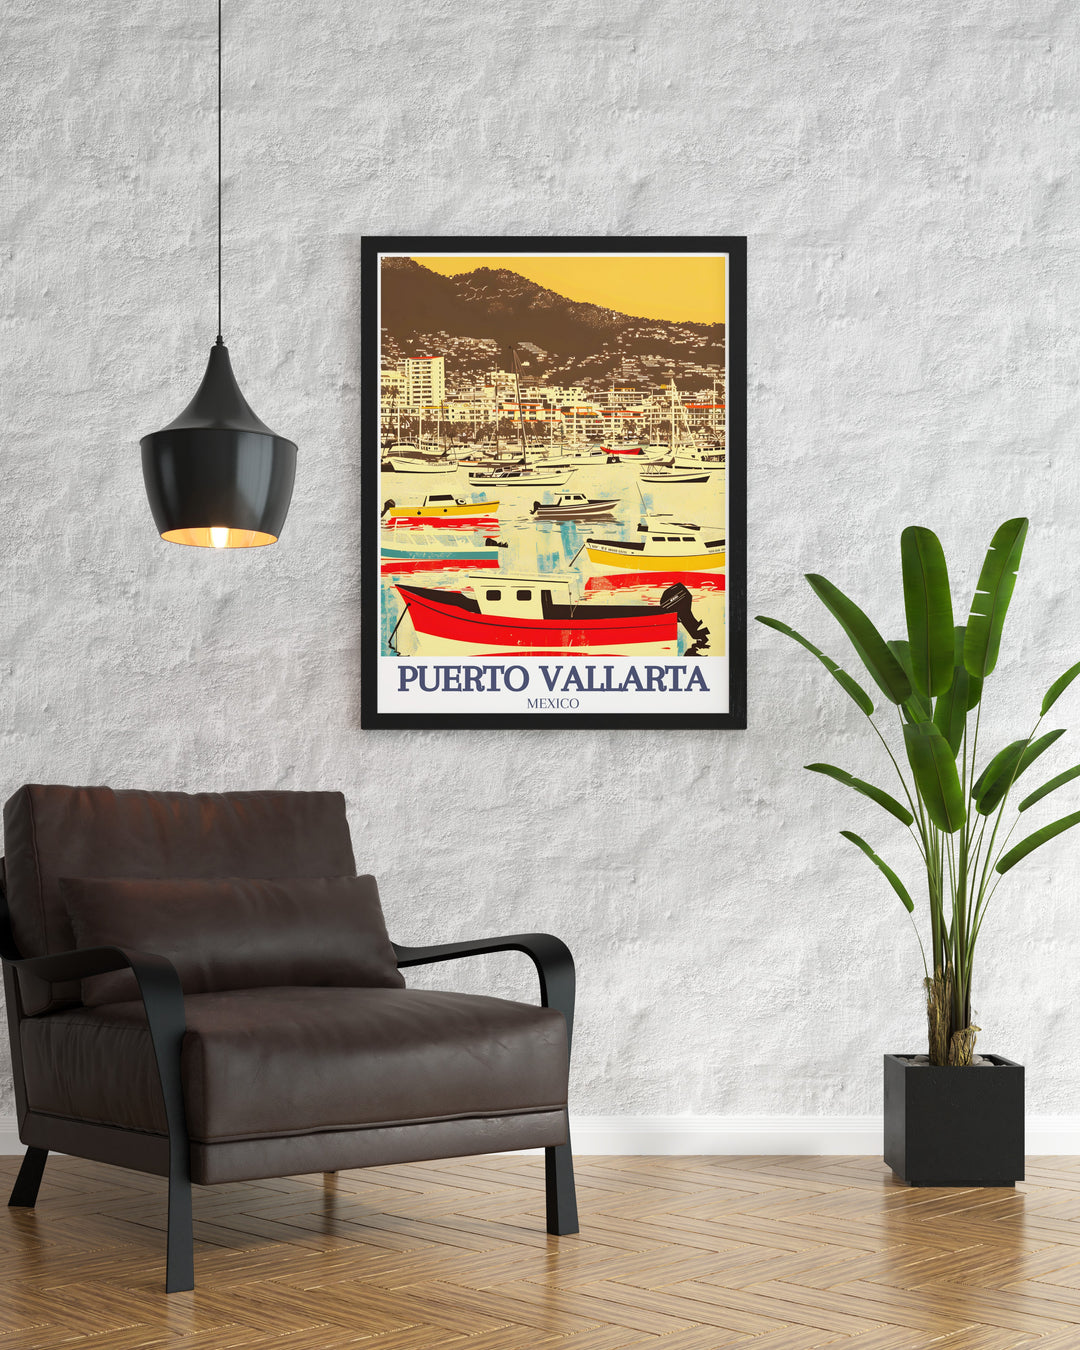 Beautiful Puebla Poster featuring detailed cityscapes and rich cultural heritage complemented by Puerto Vallarta Marina Pacific Ocean elegant home decor perfect for modern interiors